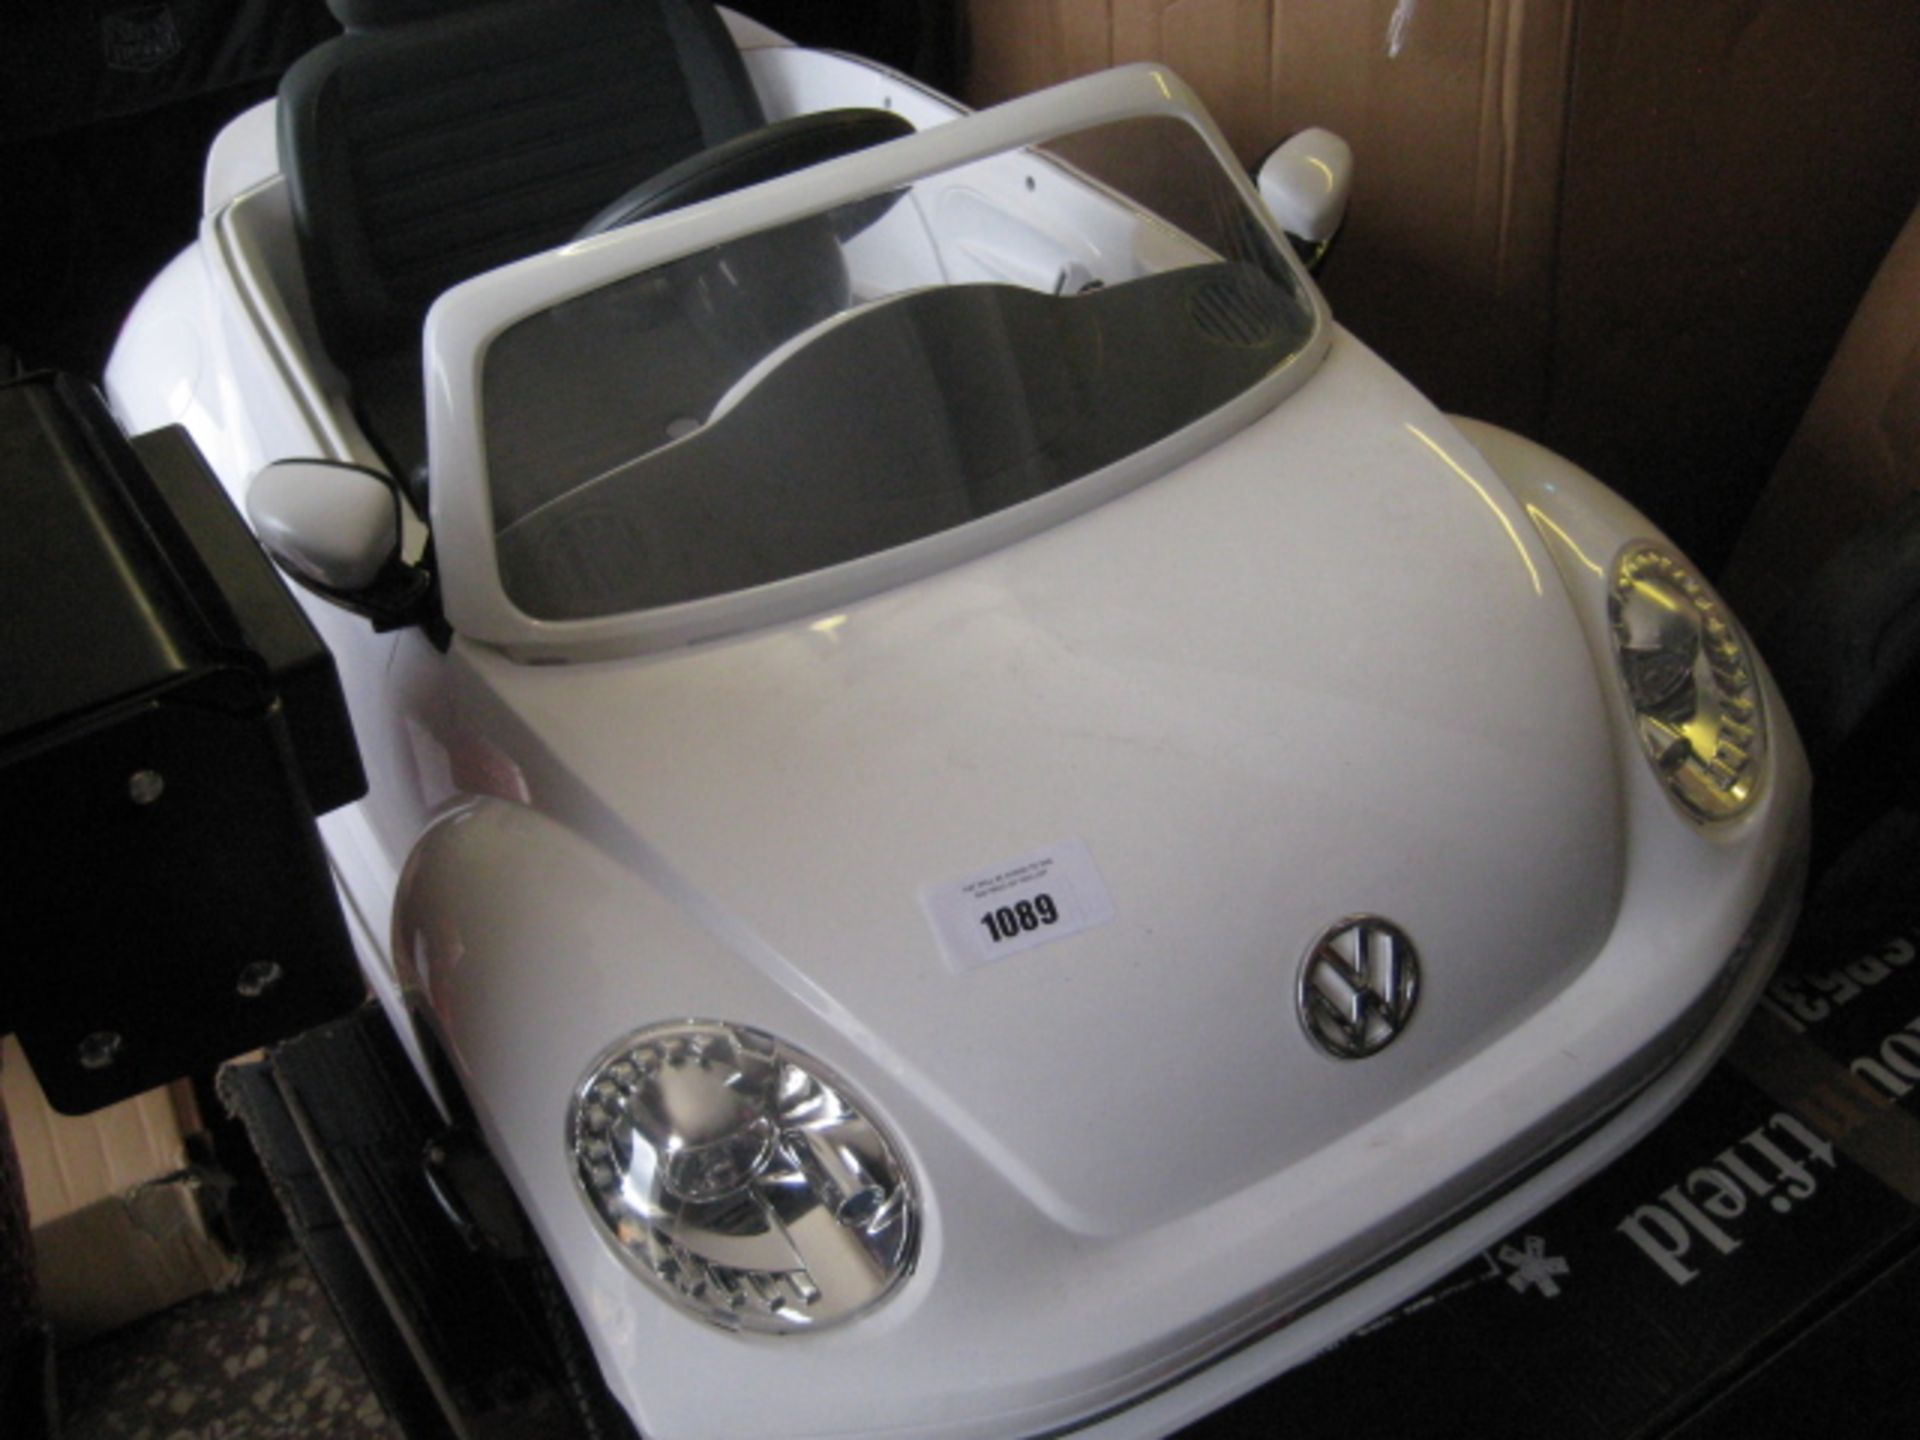 Battery operated VW childs electric car with charger